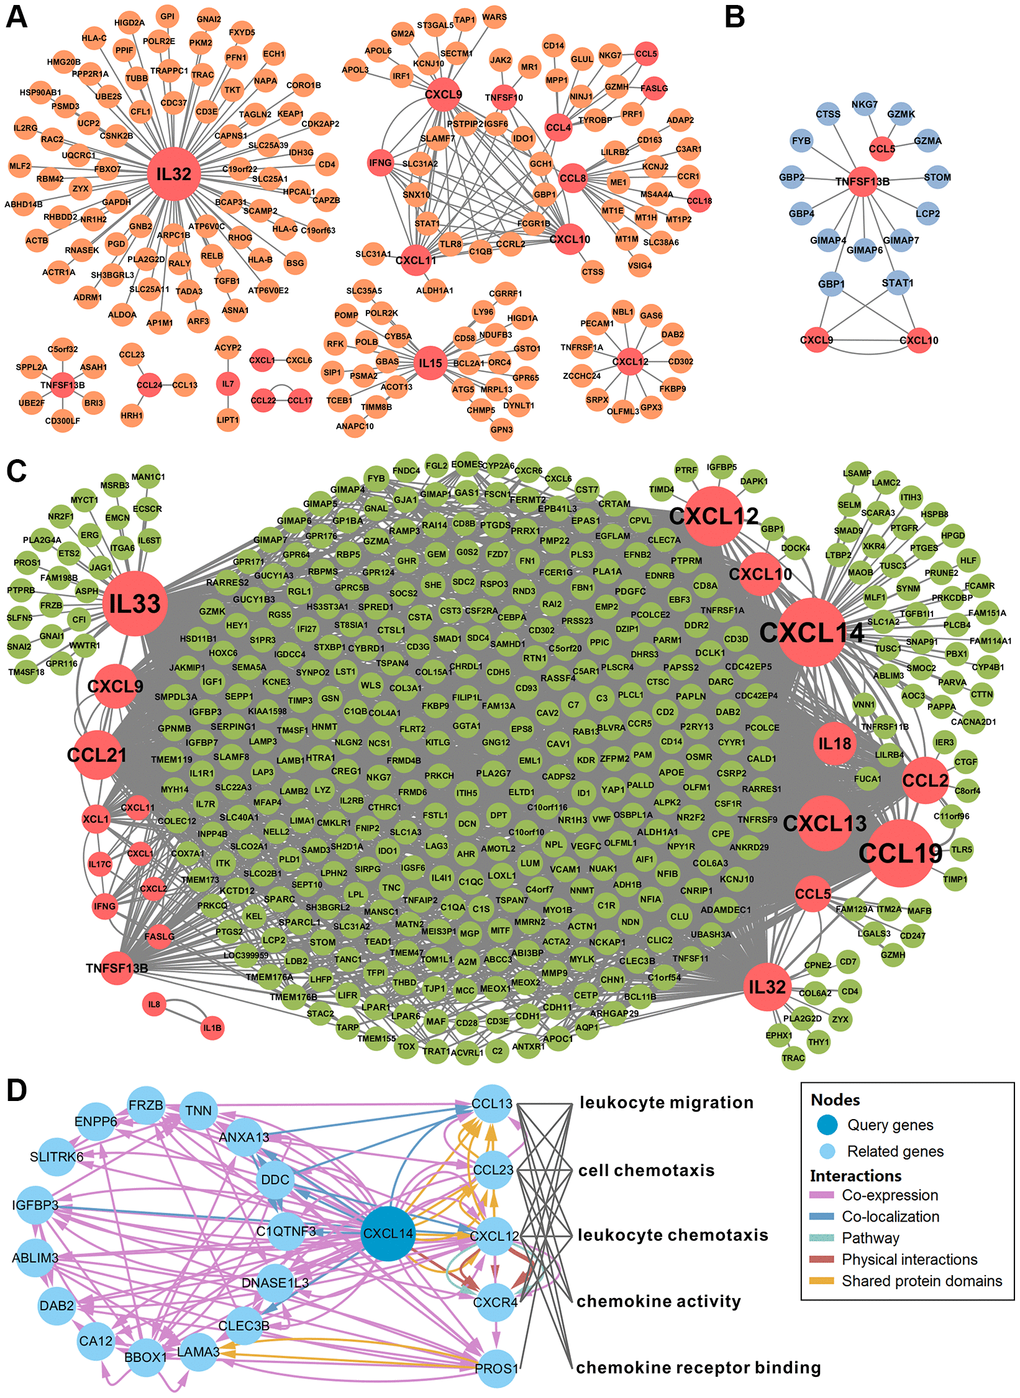 Network analysis identified CXCL14 as a key cytokine gene. (A–C) showed the gene co-expression networks of differentially expressed cytokines and other genes in Hodgkin's lymphoma, diffuse large B-cell lymphoma, and mantle cell lymphoma. Cytokine-gene pairs with correlation coefficients higher than 0.7 were chosen to build the network. The red circles represent the cytokines. The orange, blue and green circles represent the genes in each type of lymphoma. The size of the circle indicates the number of nodes. (D) Functional interaction network analysis of CXCL14. The network shows the CXCL14 related genes and their functions. Each color line represents a different interaction; the color line width indicates the weight of the interactions. There were 5 significantly enriched biological functions and the grey line indicates the gene is involved in the biological function.